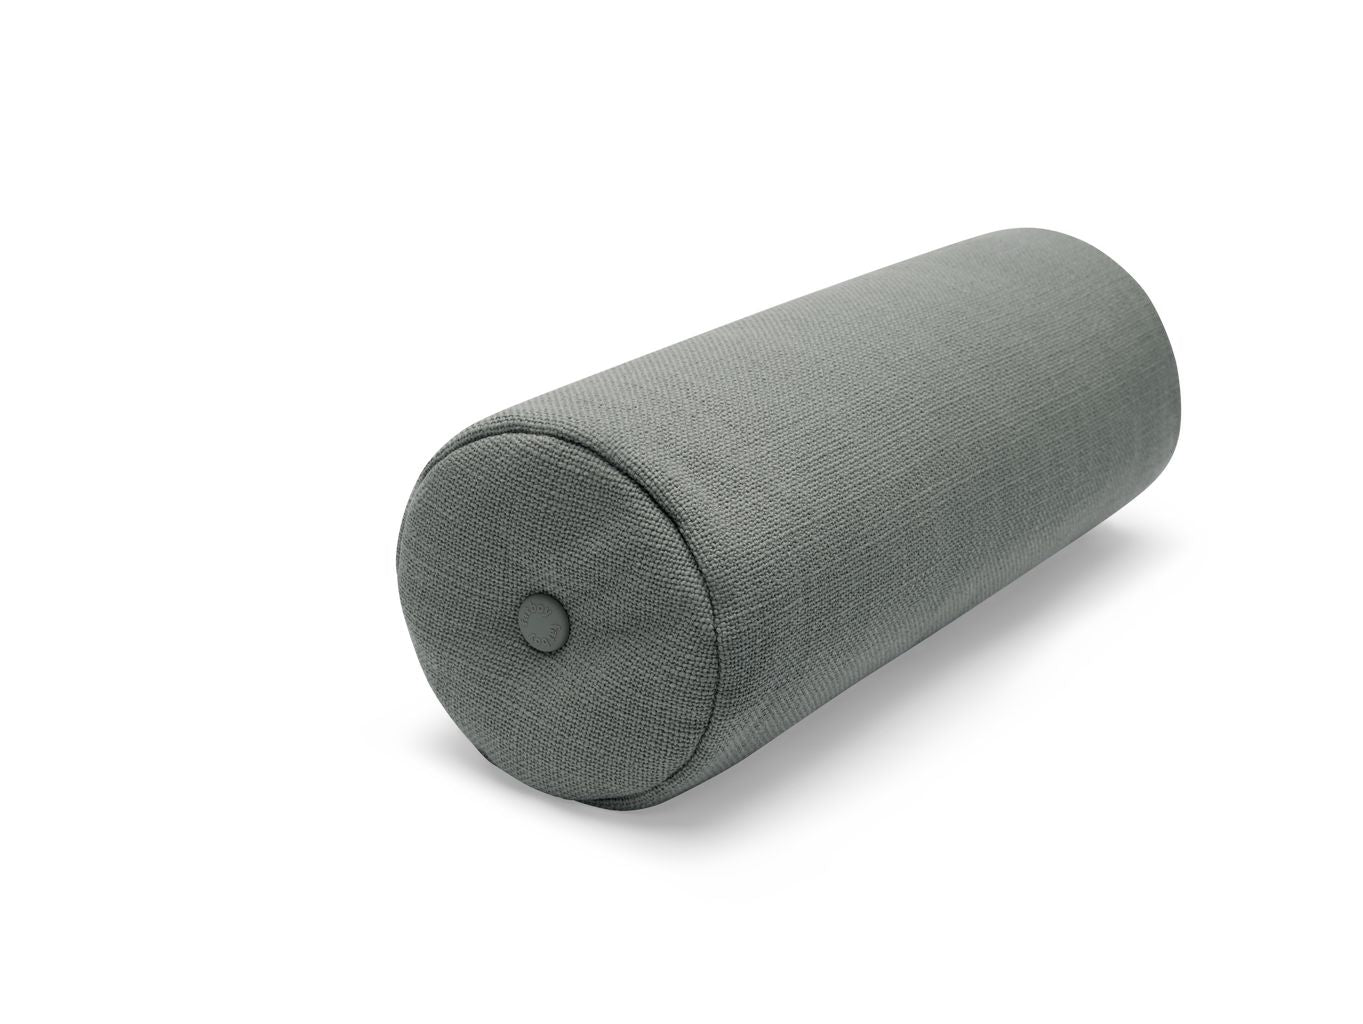 Fatboy Puff Weave Rolster Pillow, Mouse Grey